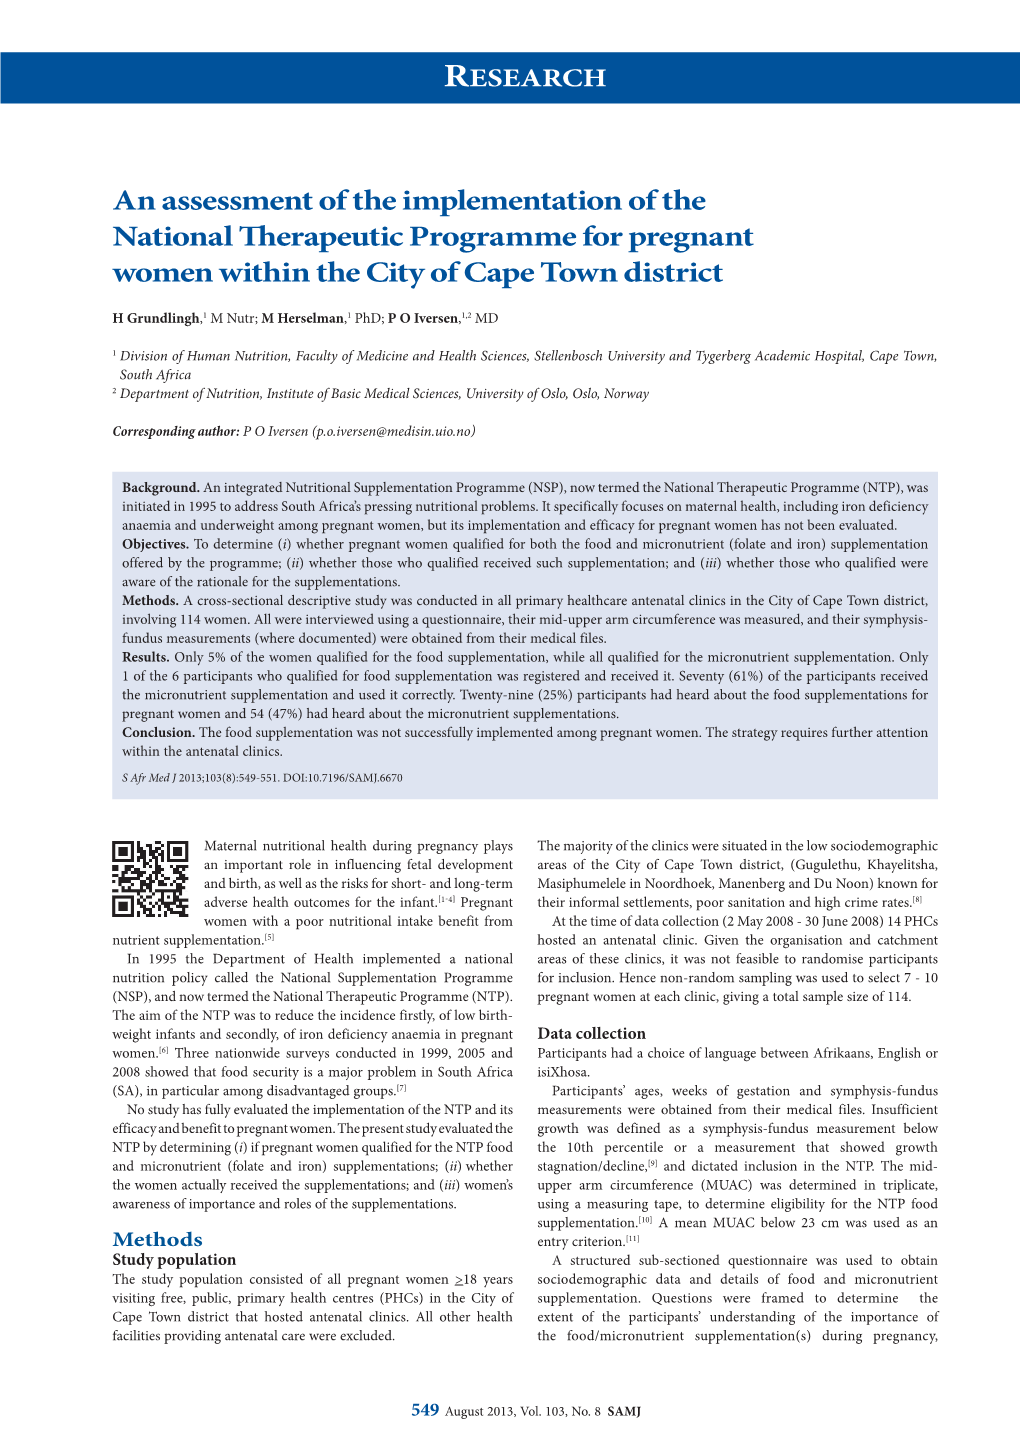 An Assessment of the Implementation of the National Therapeutic Programme for Pregnant Women Within the City of Cape Town District